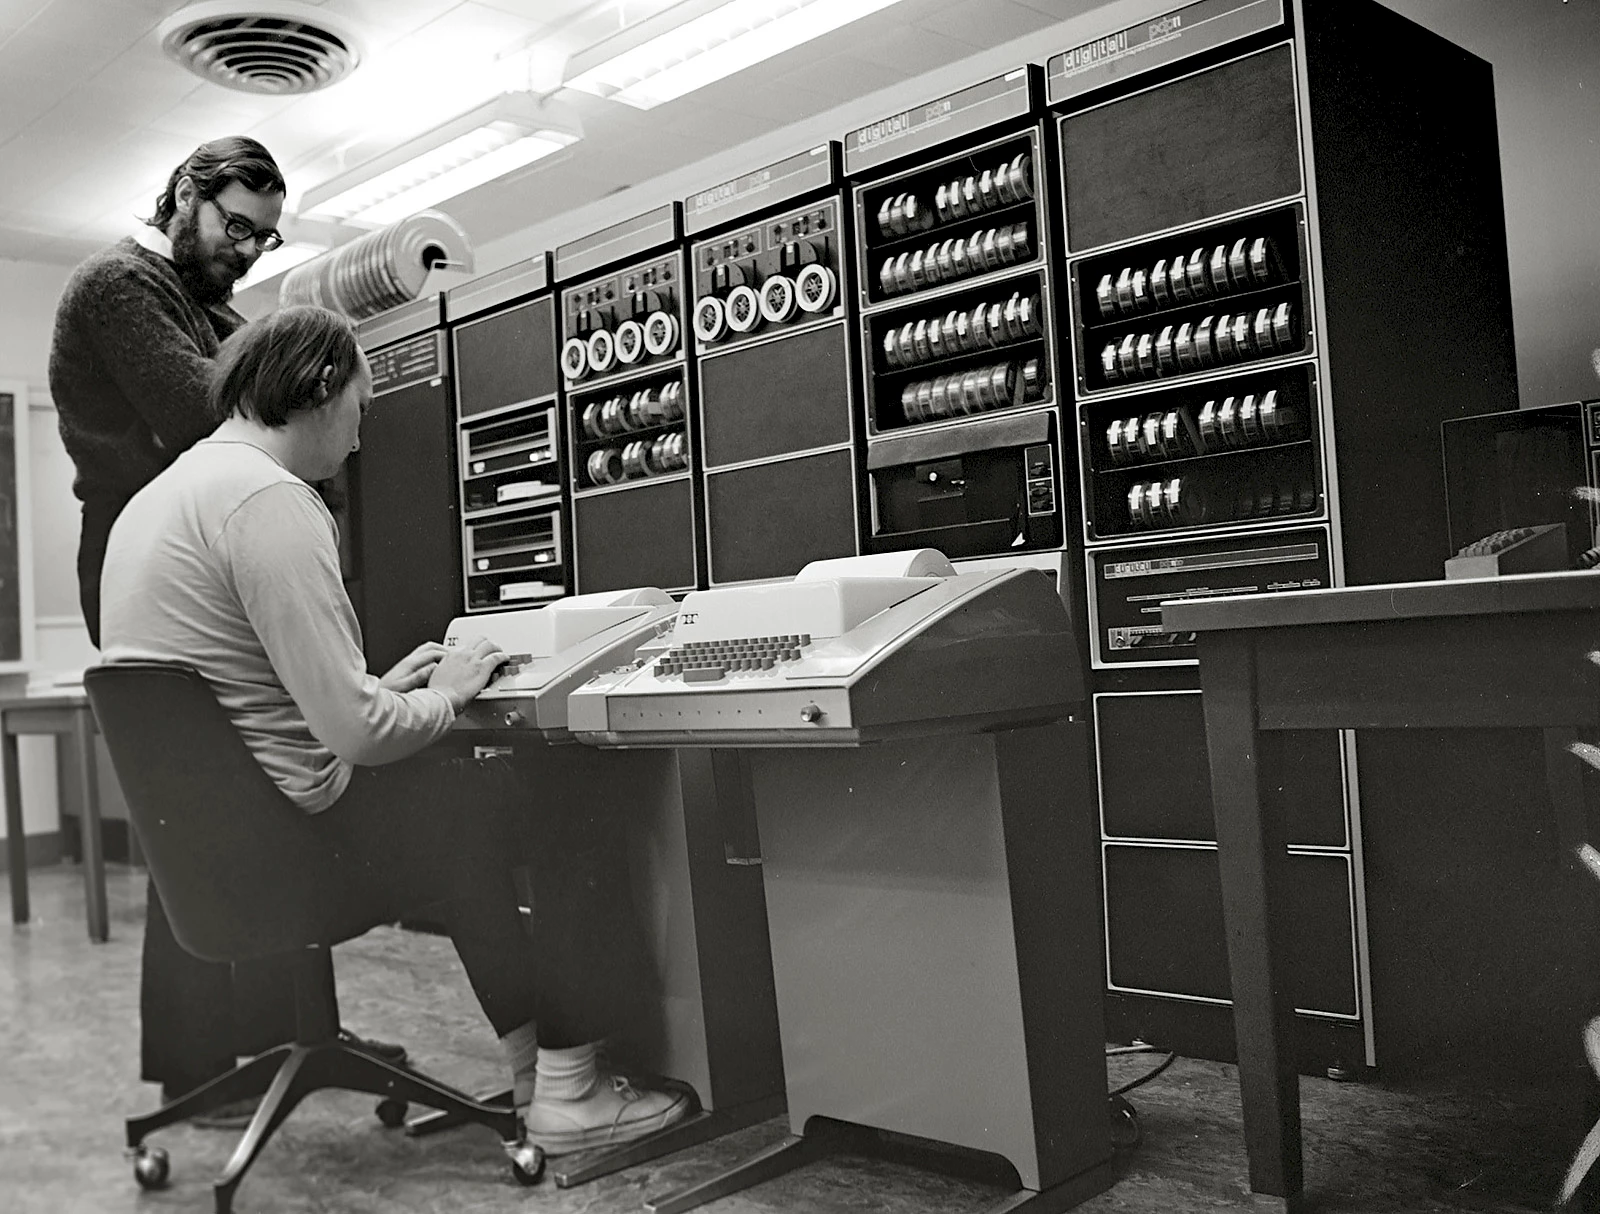 Ken Thompson (sitting) and Dennis Ritchie (standing) in front of a PDP-11.